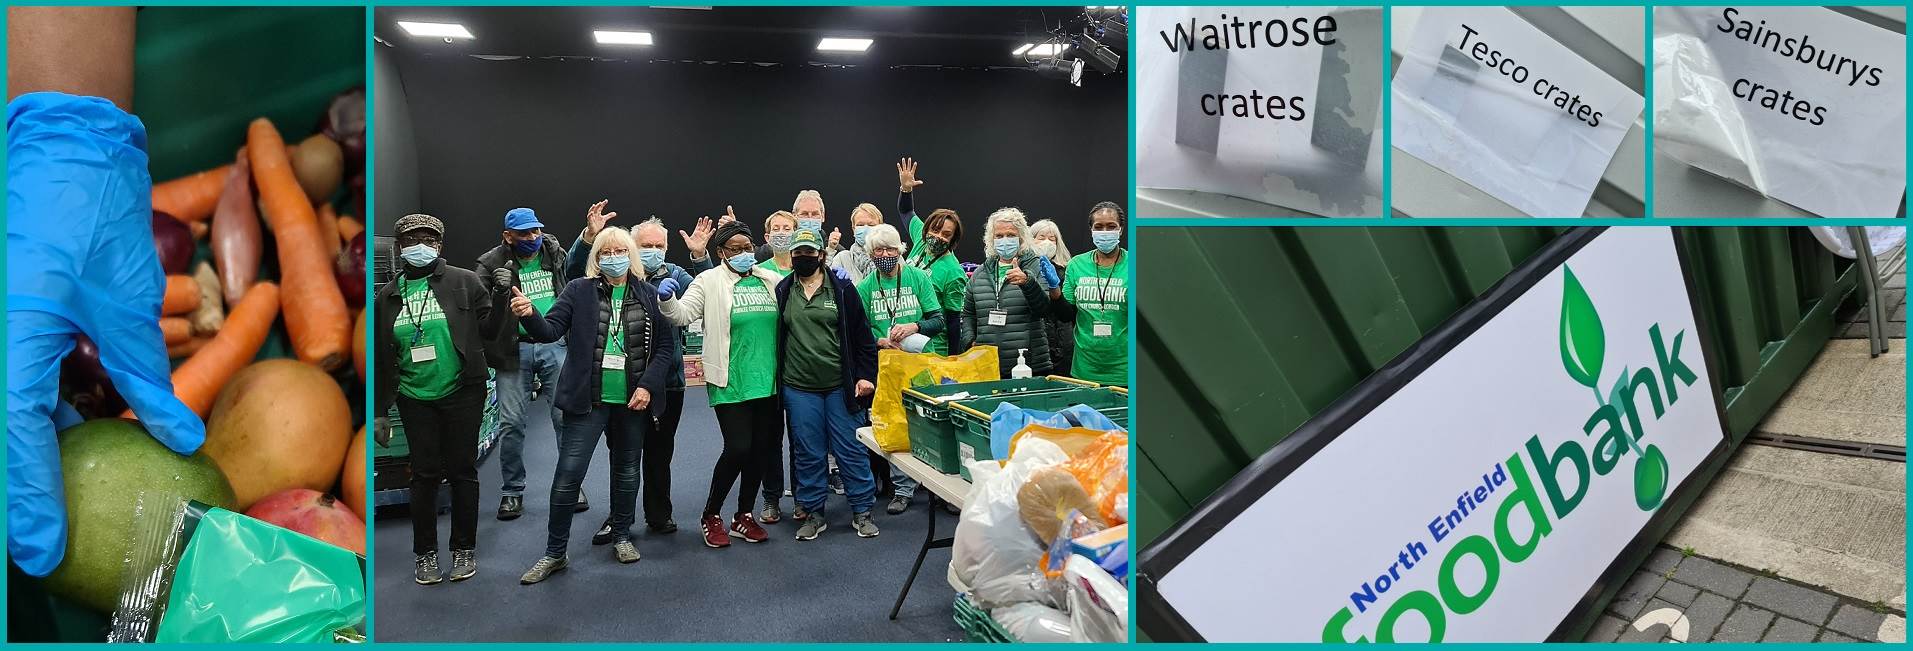 Photos from North Enfield Food Bank courtesy of Onjali Q. Raúf